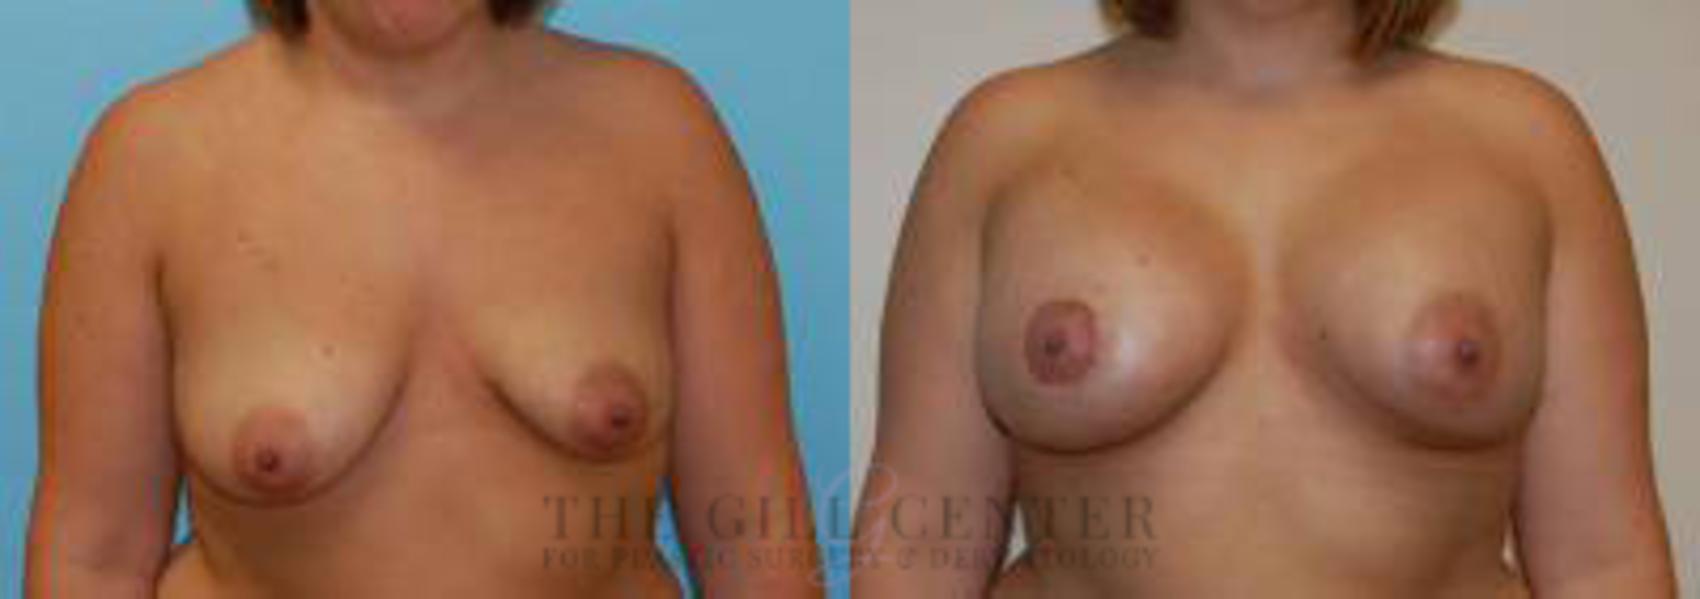 Breast Lift with Implants Case 116 Before & After Front | The Woodlands, TX | The Gill Center for Plastic Surgery and Dermatology